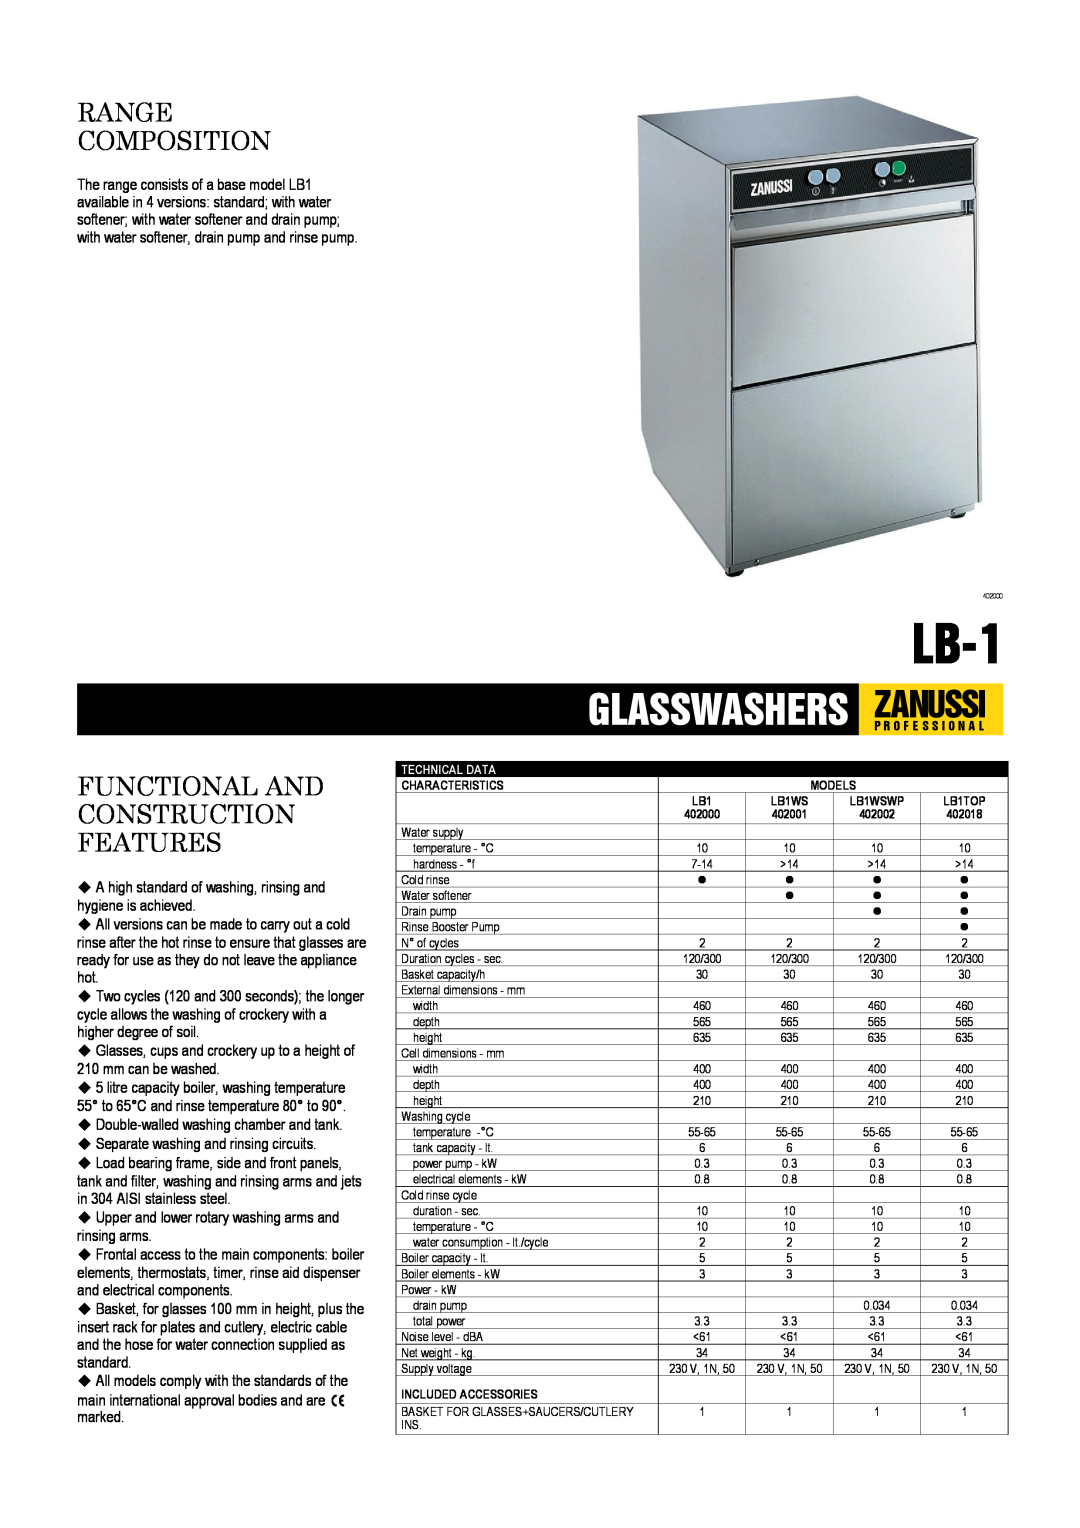 Electrolux LB-1, LB1TOP, LB1WSWP, 402001, 402002, 402018 dimensions Range Composition, Functional And Construction Features 